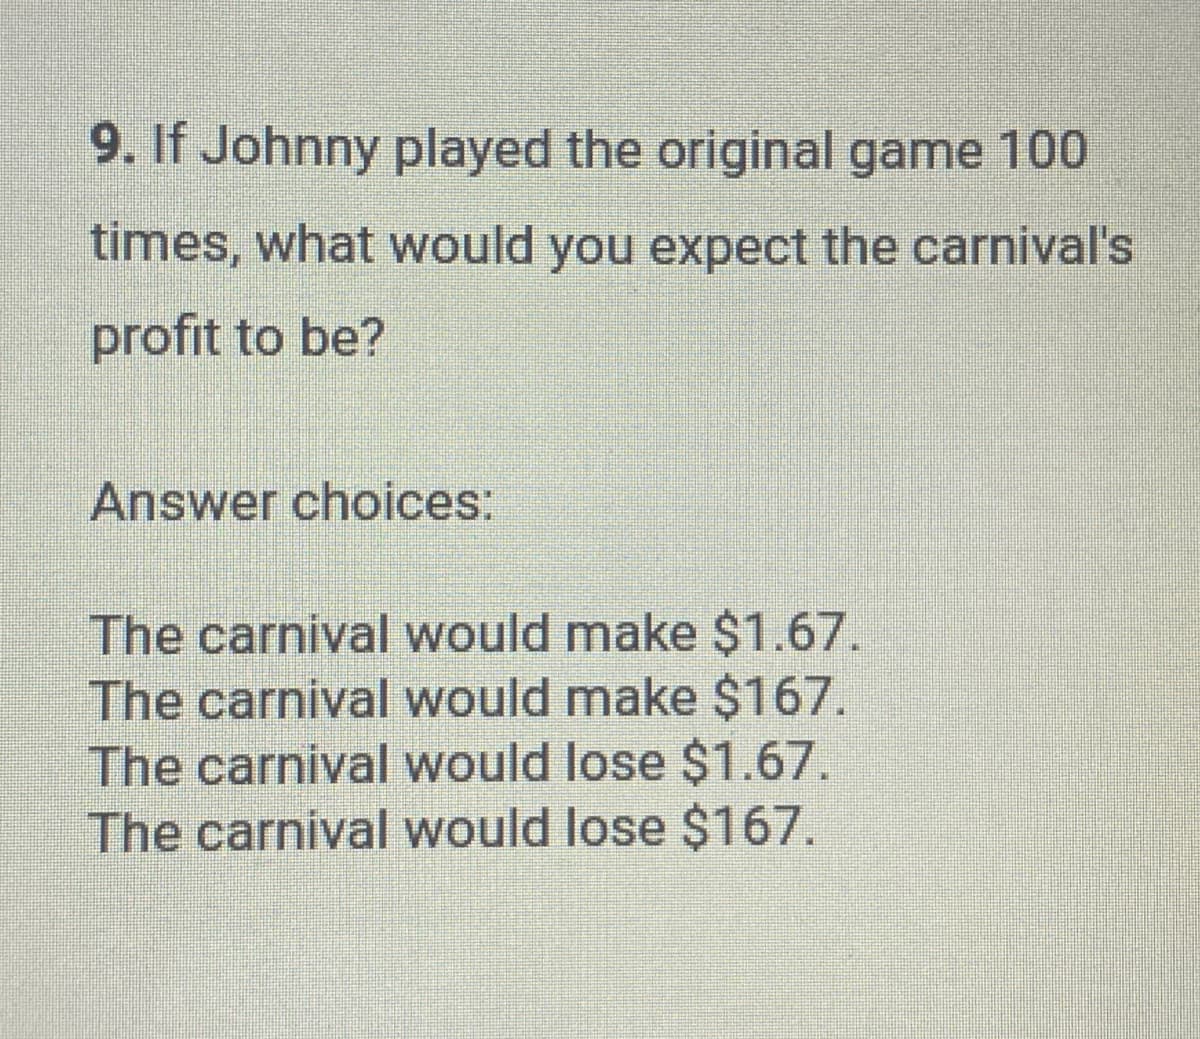 9. If Johnny played the original game 100
times, what would you expect the carnival's
profit to be?
Answer choices:
The carnival would make $1.67.
The carnival would make $167.
The carnival would lose $1.67.
The carnival would lose $167.